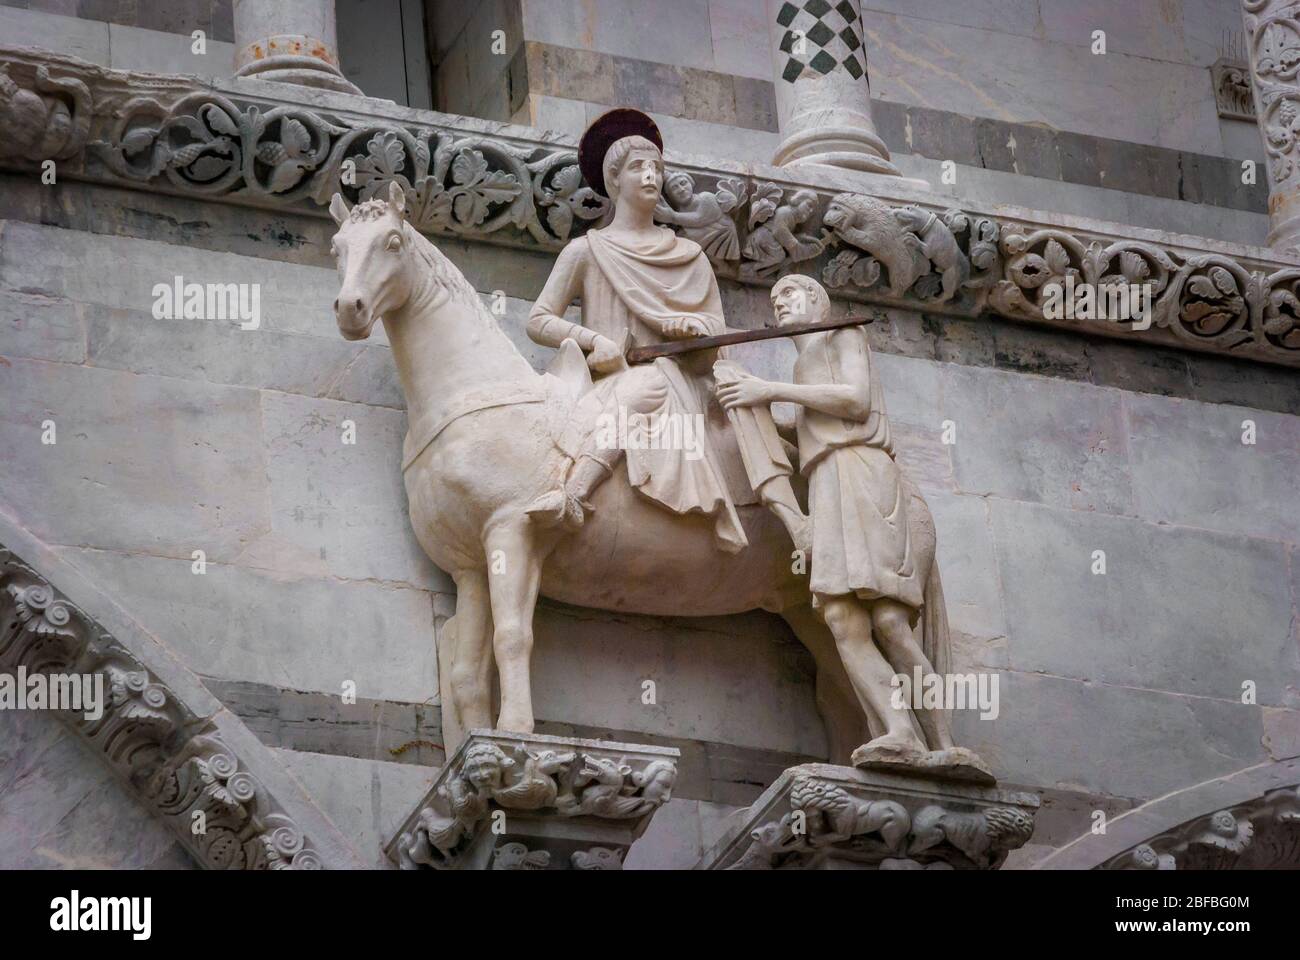 Saint Martin and the beggar, ca. 1200, Statue on the Facade of St. Martin Cathedral in Lucca, Tuscany, Italy Stock Photo